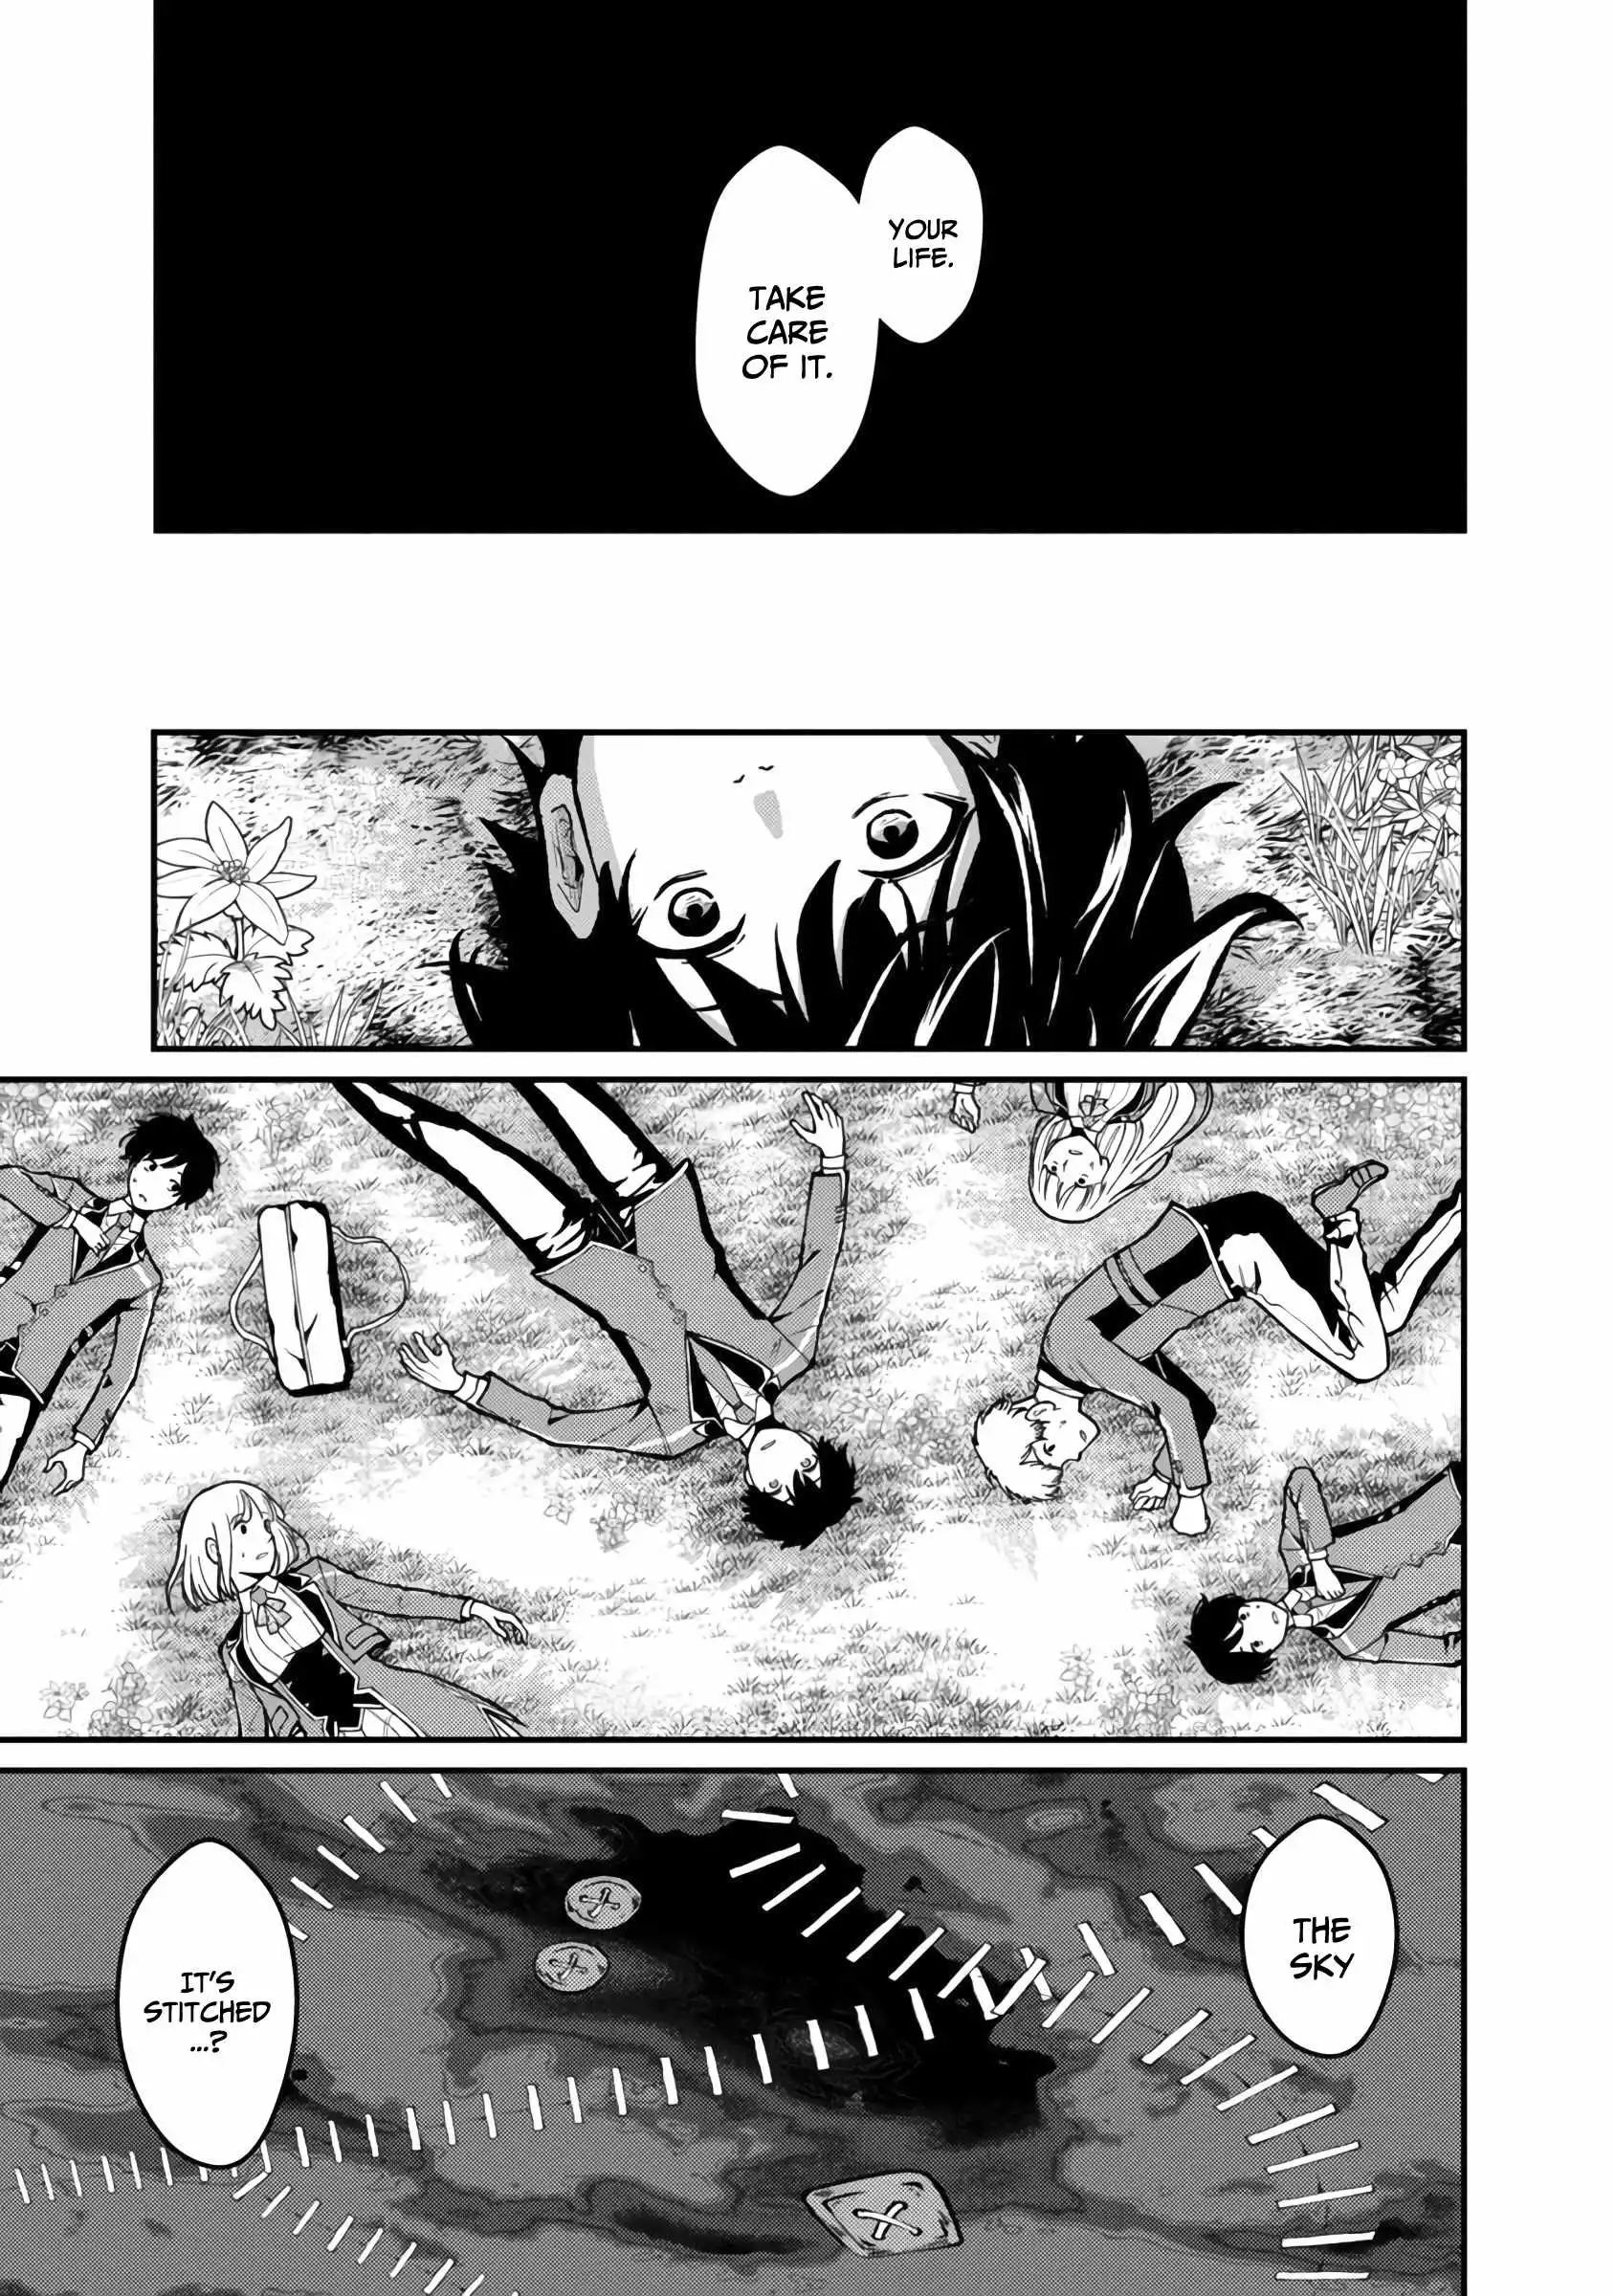 A brave man trained by the worst demon king, unrivaled in the school of returnees from another world Chapter 4